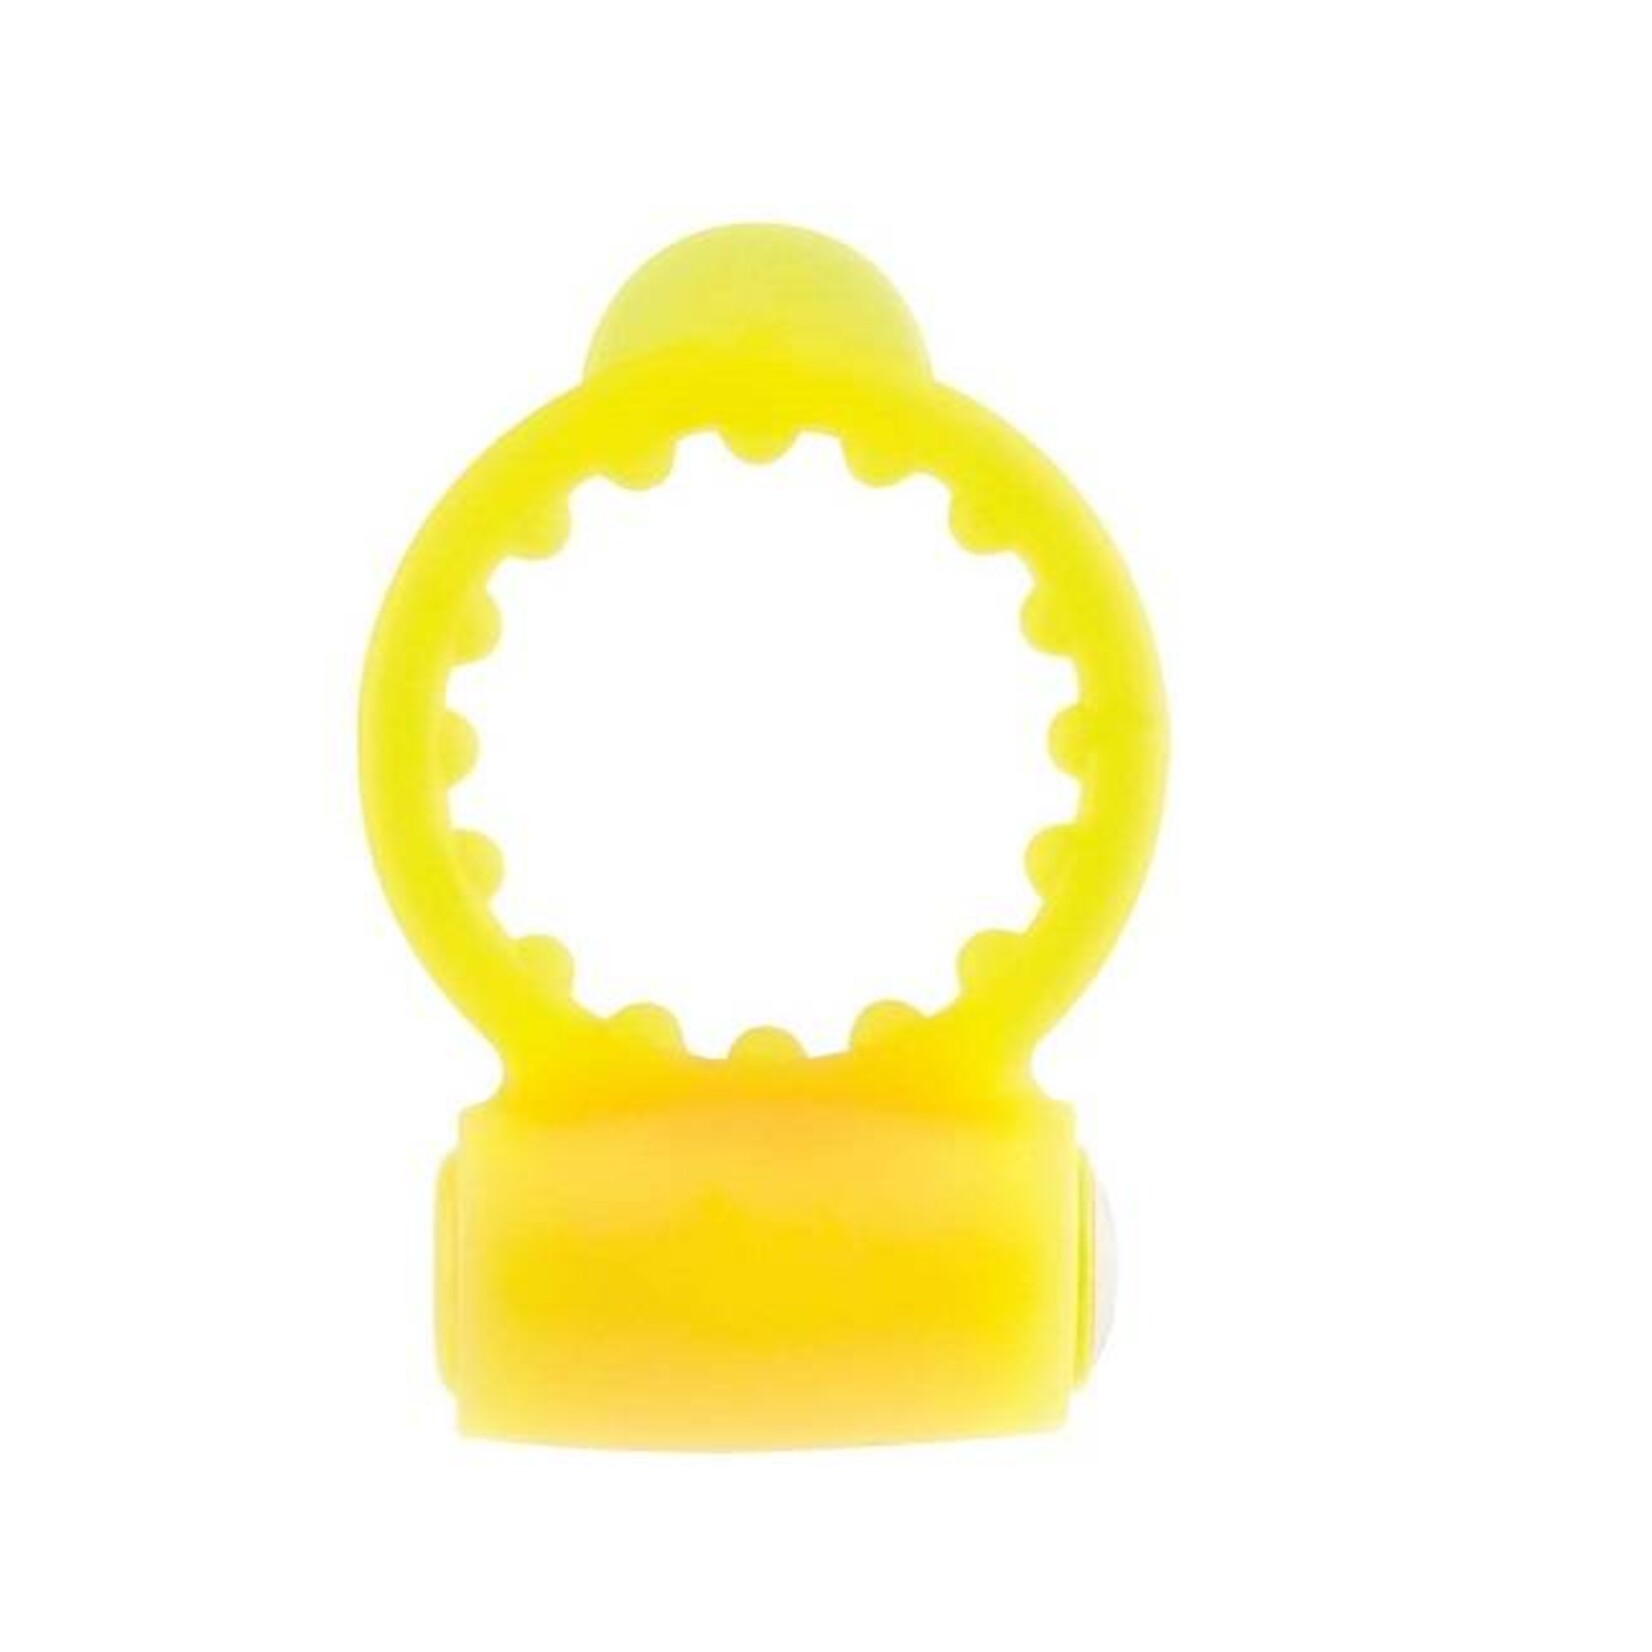 Neon Luv Touch Neon Vibrating Cock Ring